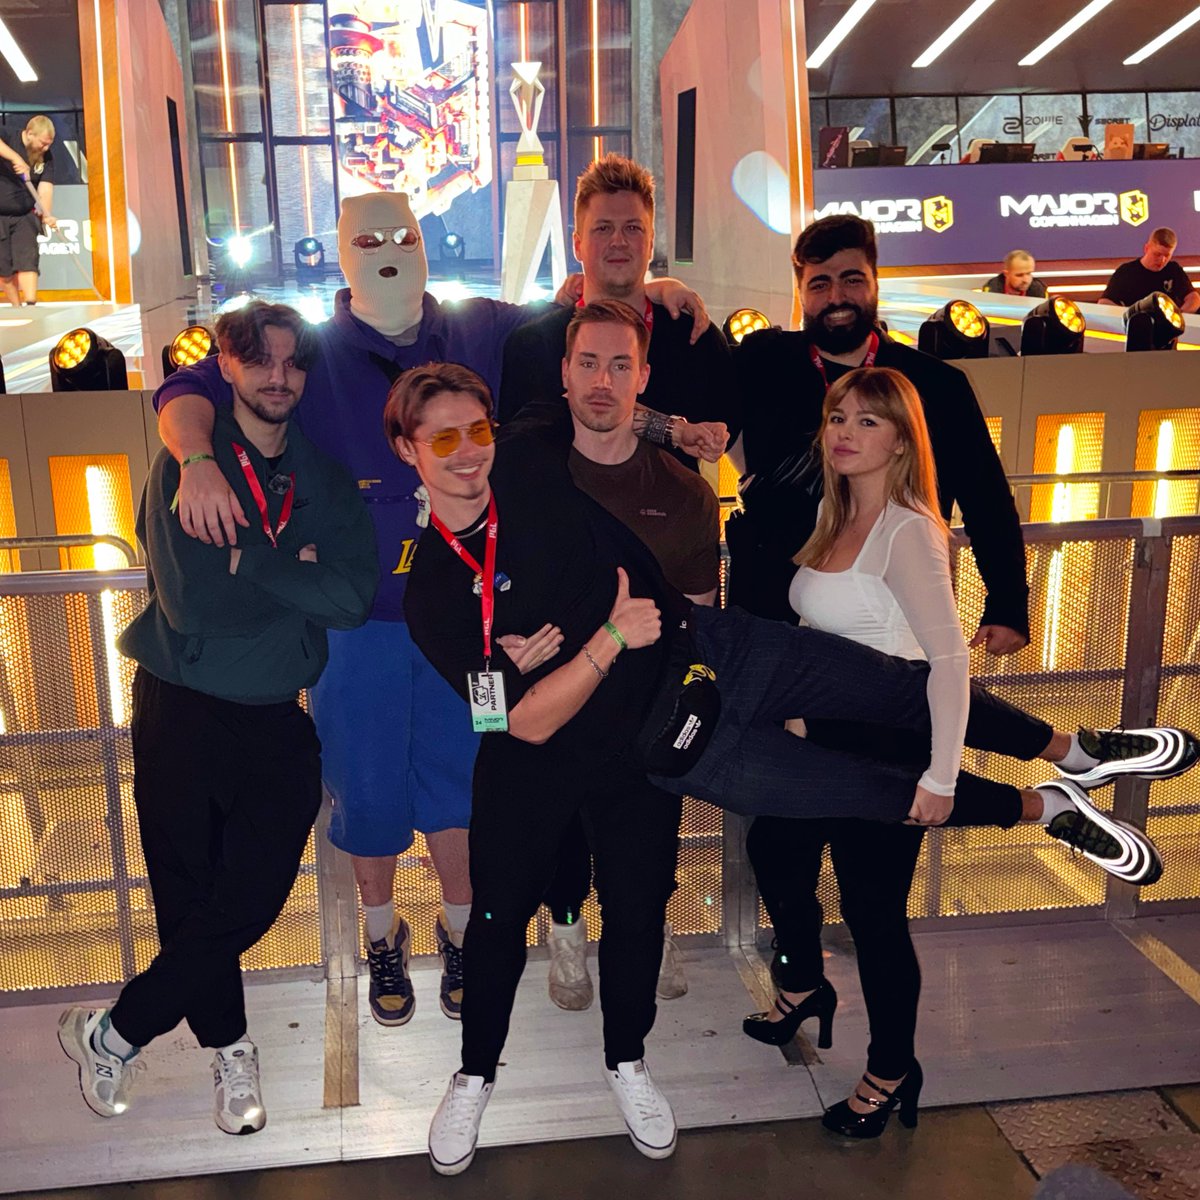 Besides all the content on camera there has been a lot going on “offline” aswell in the last weeks. I’ve been managing a huge project alongside @ultiagency to get this 5 creators to the major. It’s been a long road to make everything work but the result was unforgettable..